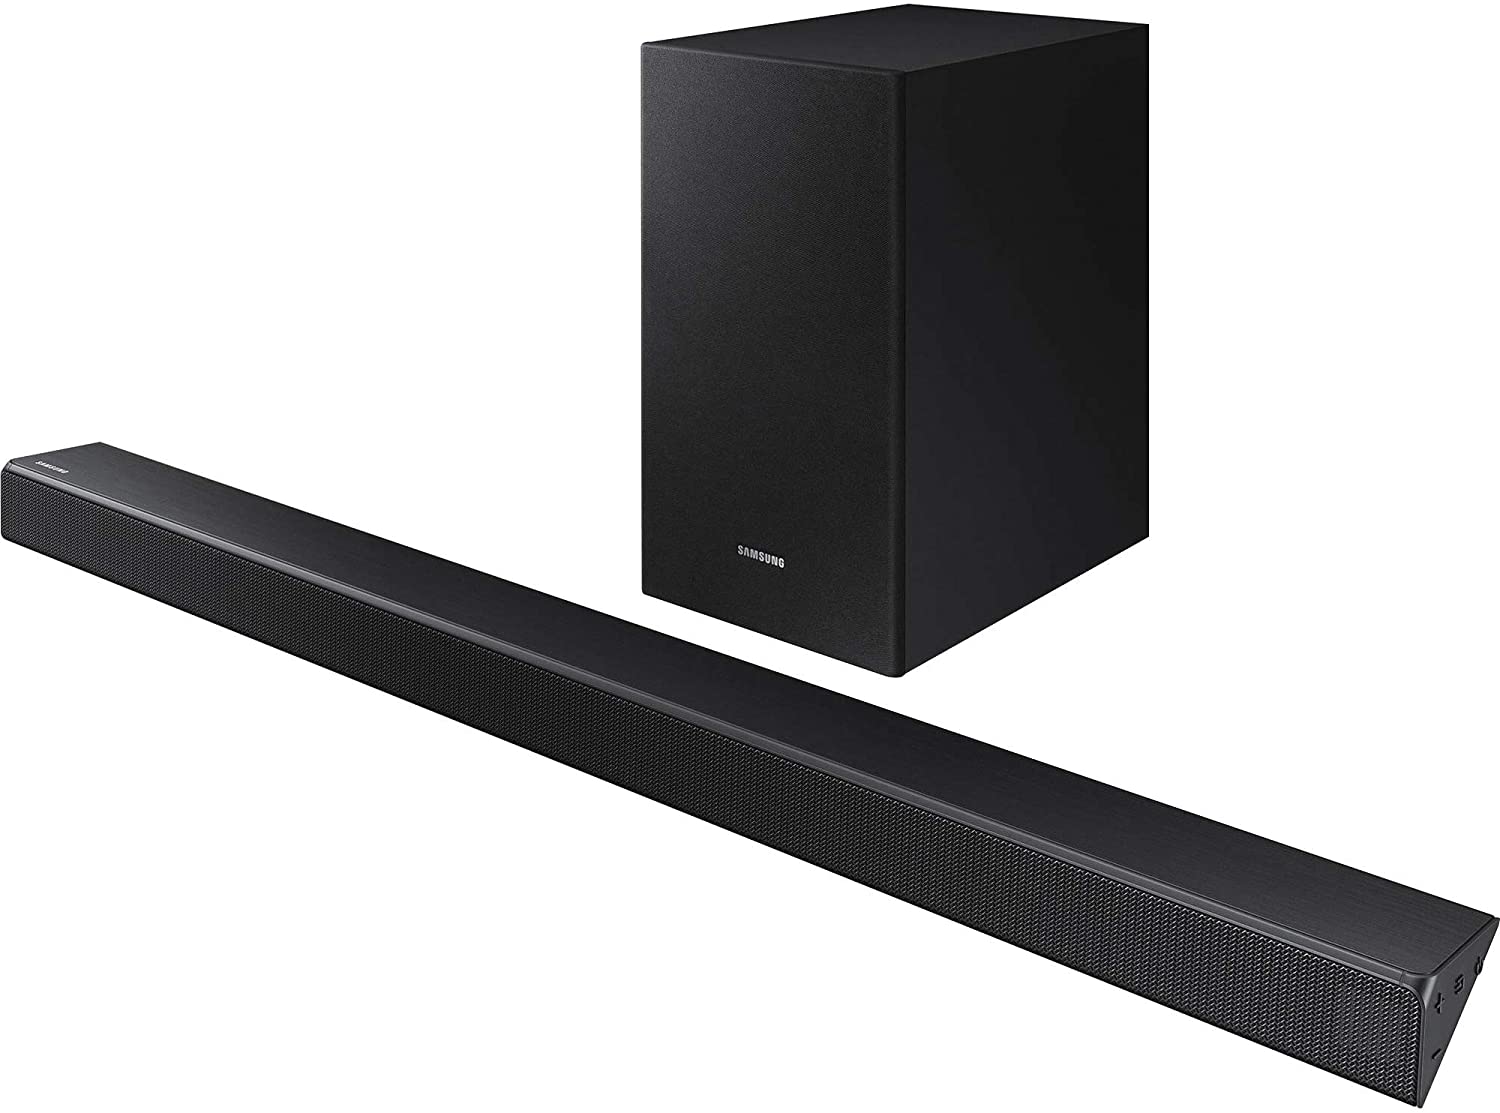 Top Sound bar for gaming